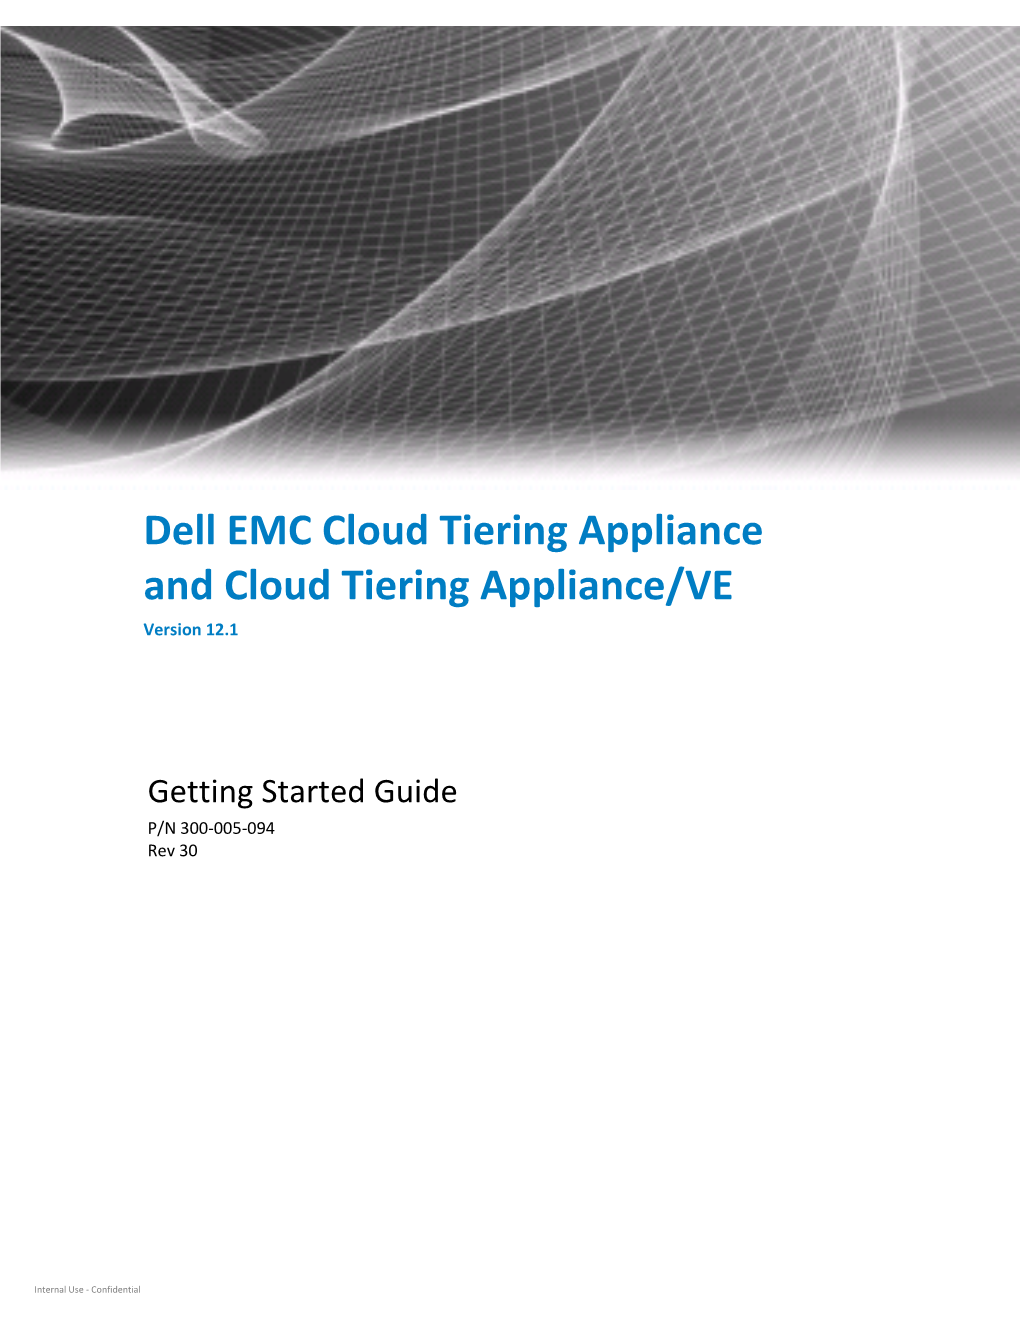 Dell EMC Cloud Tiering Appliance and Cloud Tiering Appliance/VE Version 12.1